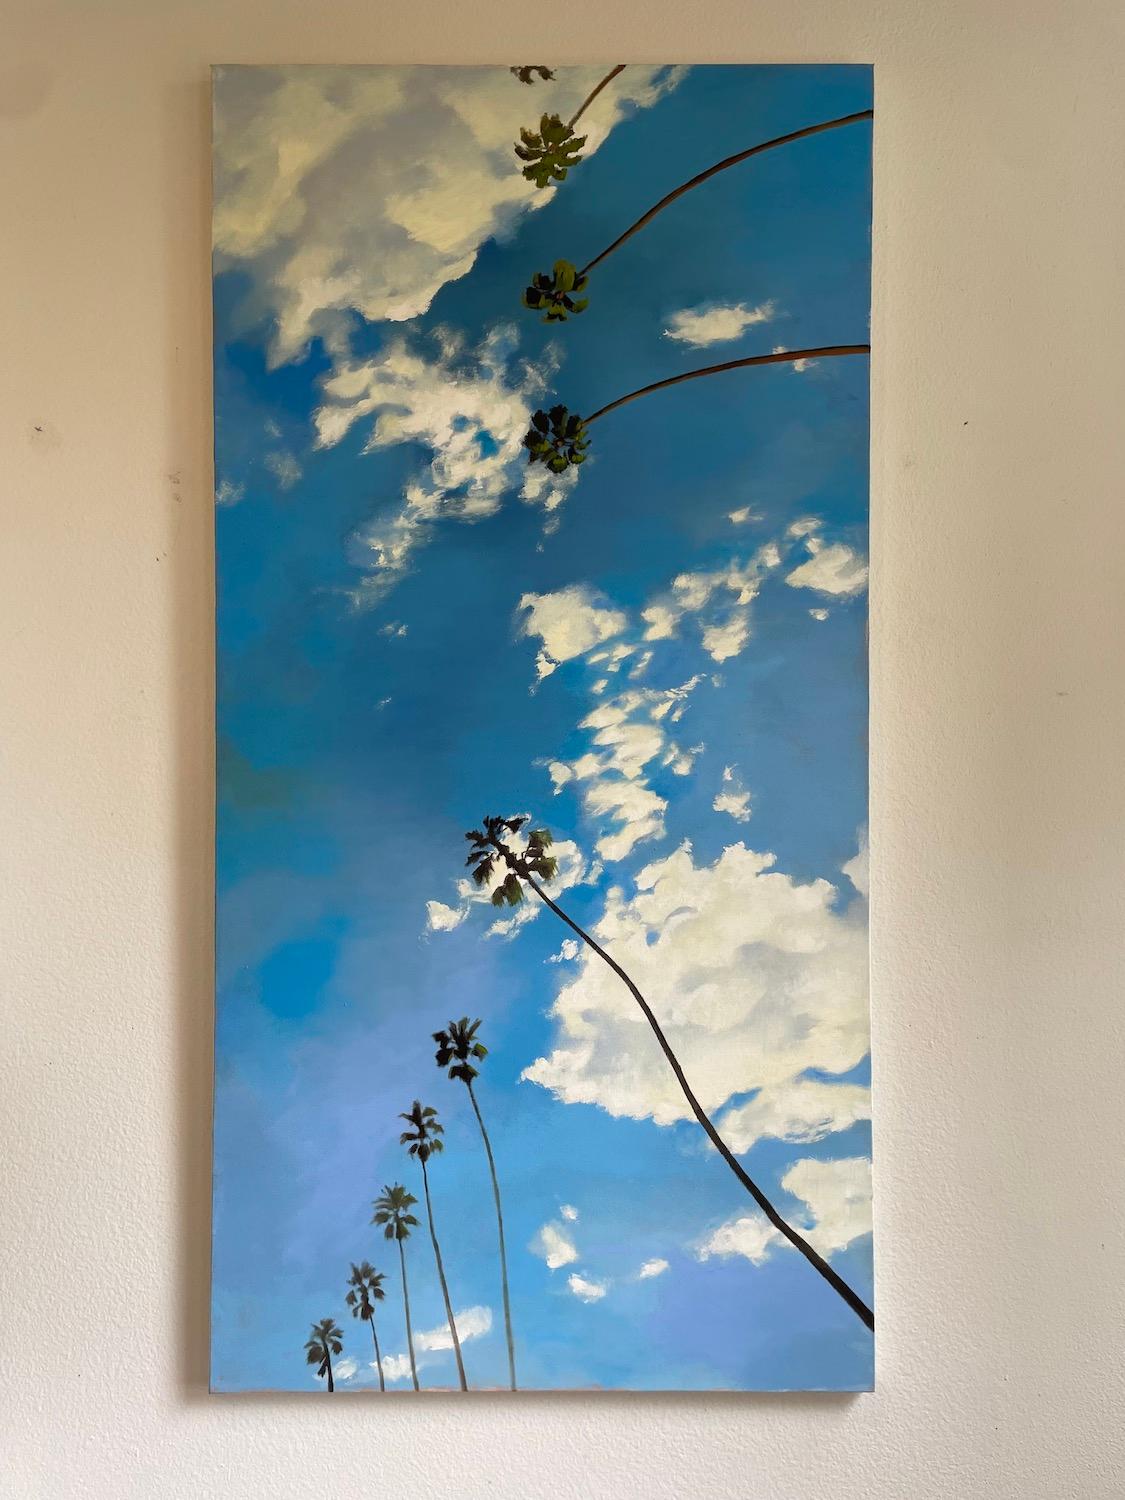 <p>Artist Comments<br>Artist Jesse Aldana presents a skyscape from a ground-level angle in realistic detail. White clouds, flattened in their haste, race across the sky. It leaves the palm trees that sway in their wake to wonder at their